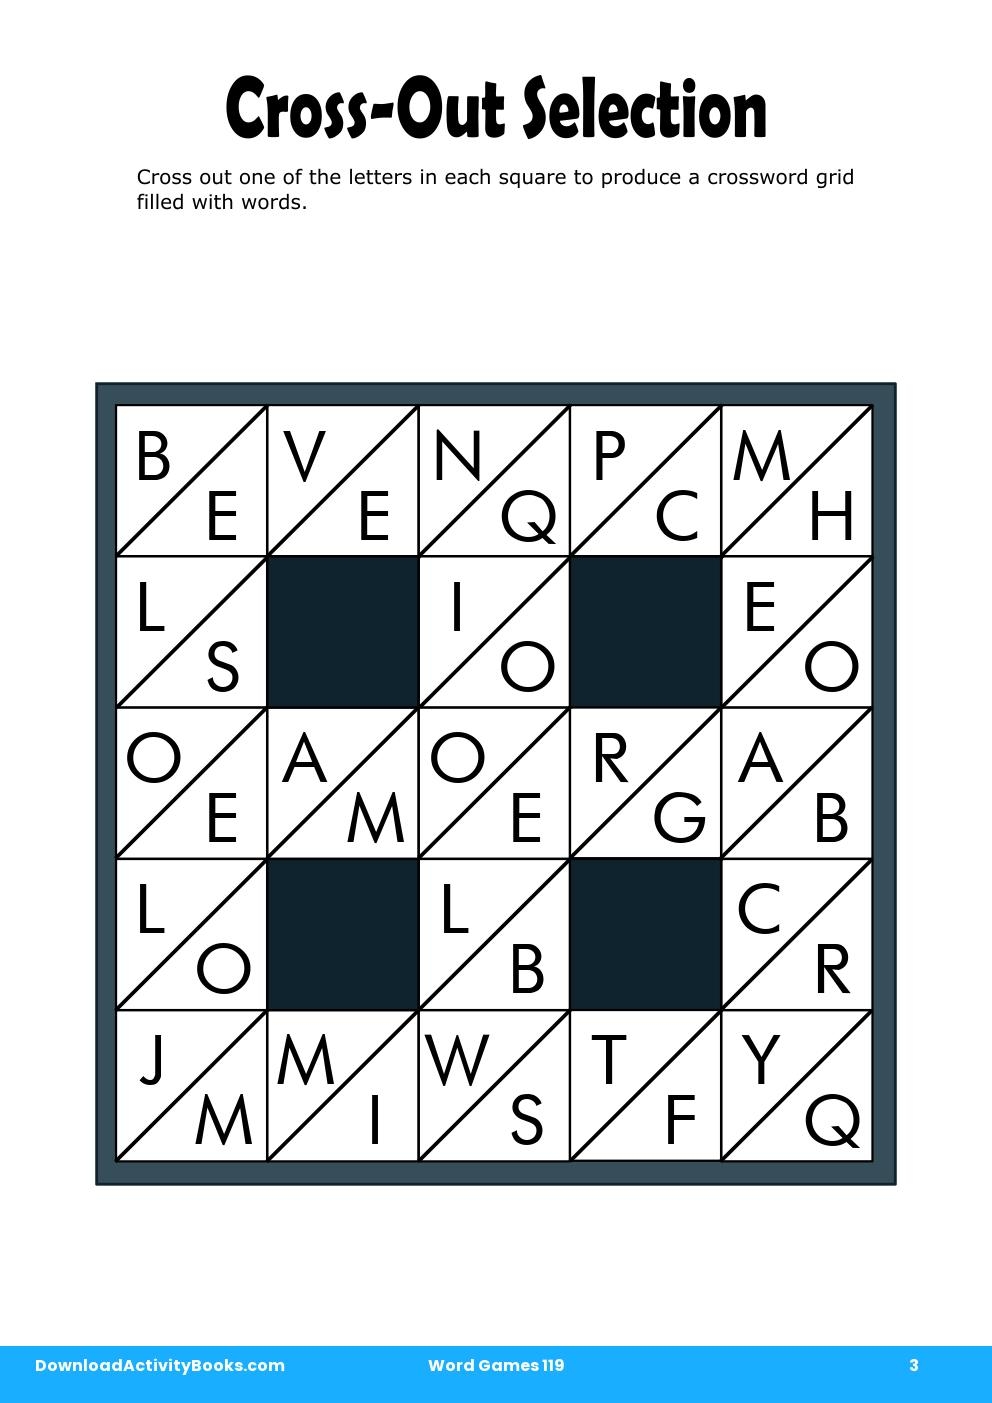 Cross-Out Selection in Word Games 119